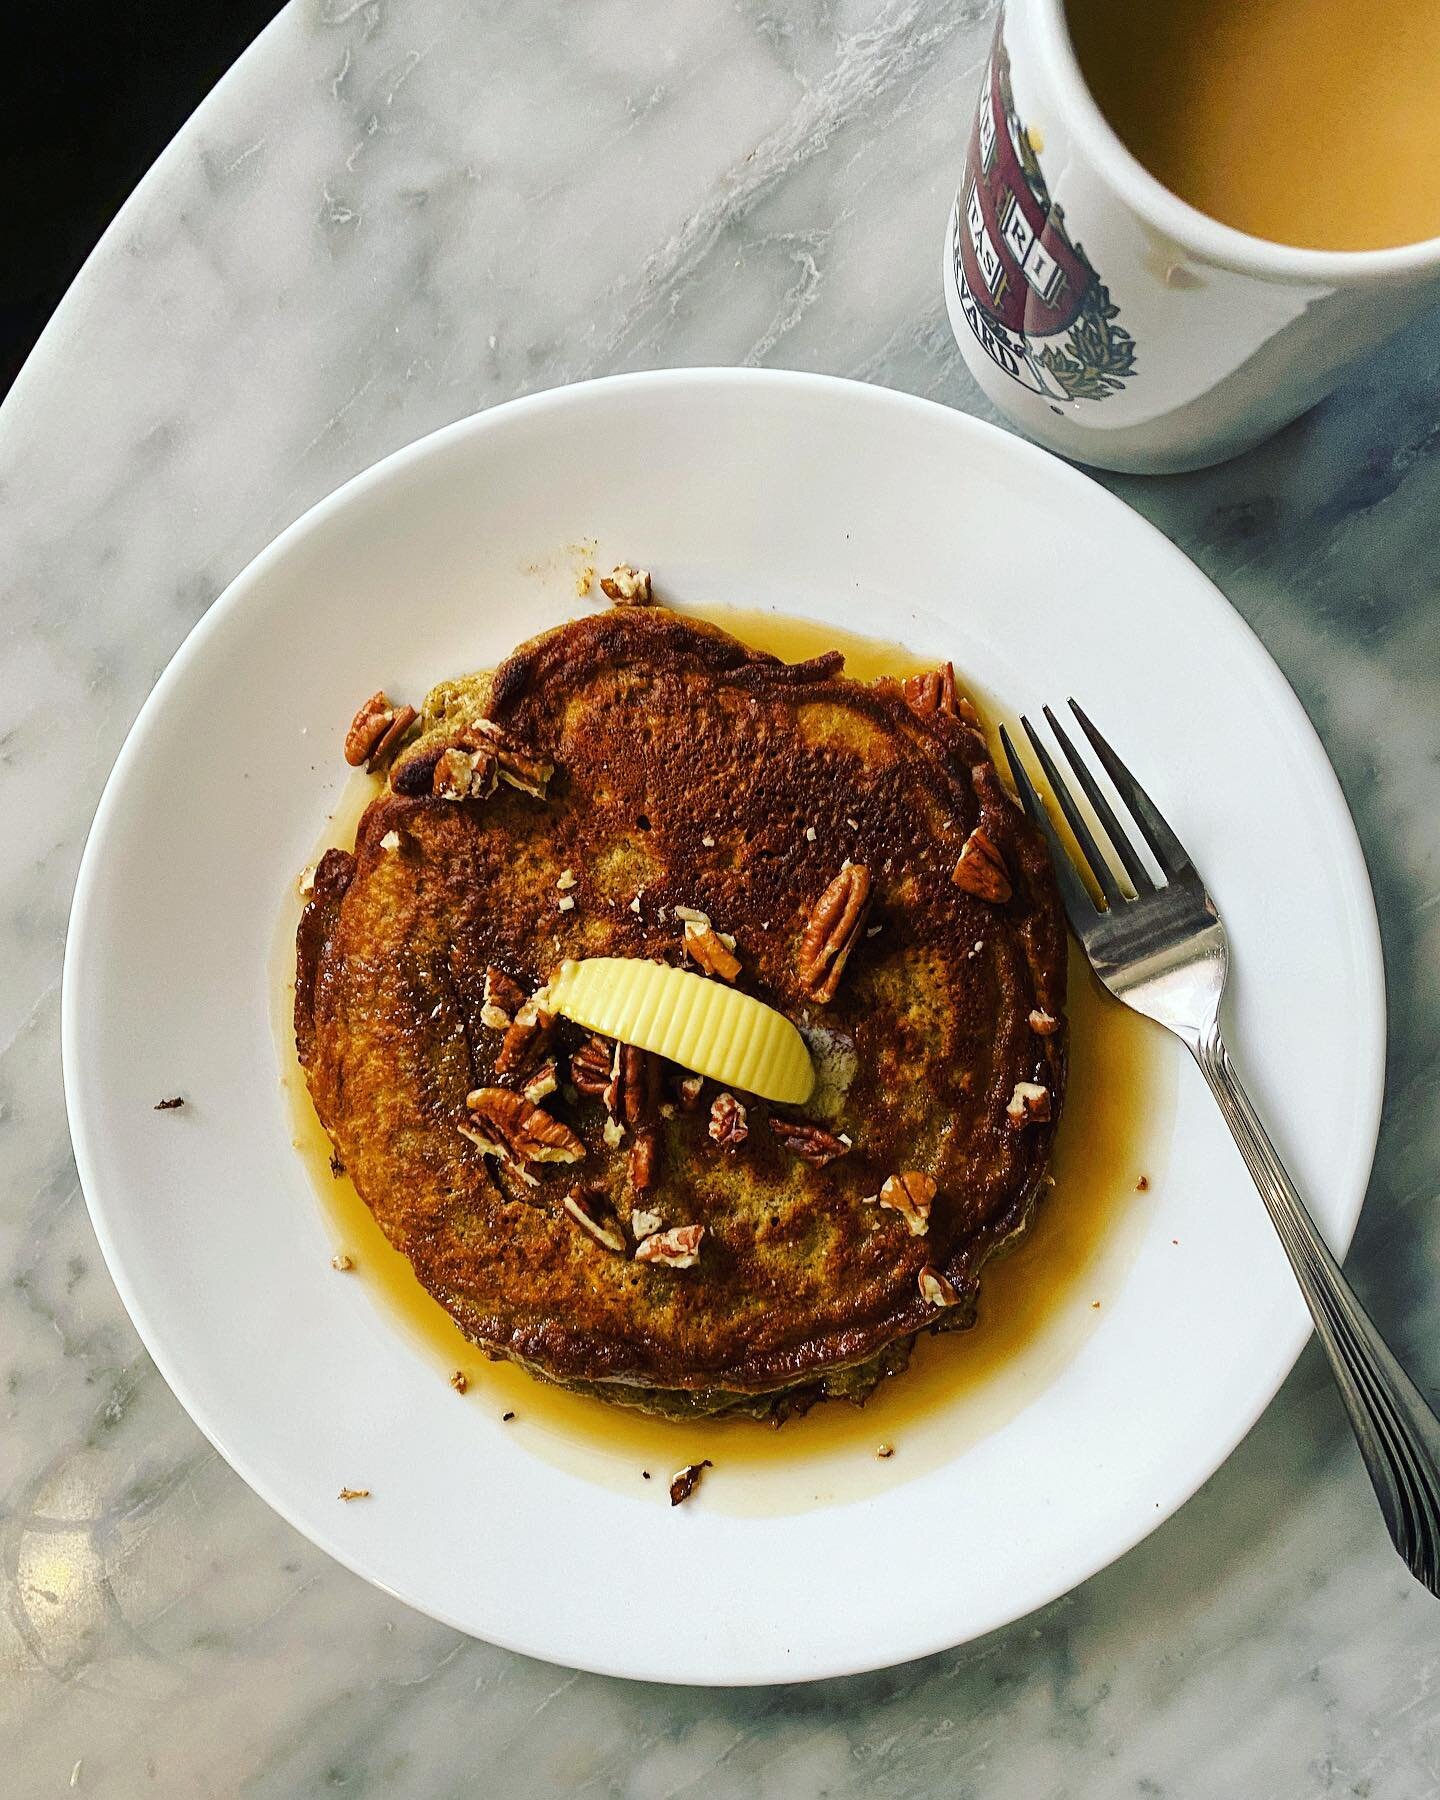 A pancake even a pancake nay-sayer like me could love &mdash; lots of whole grain, fried crispy edges, toasty nuts, and the perfect amount of maple-y sweetness. 
Wholesome Pancake Formula:

1 cup AP flour
1/2 cup whole wheat flour
1/2 cup buckwheat f